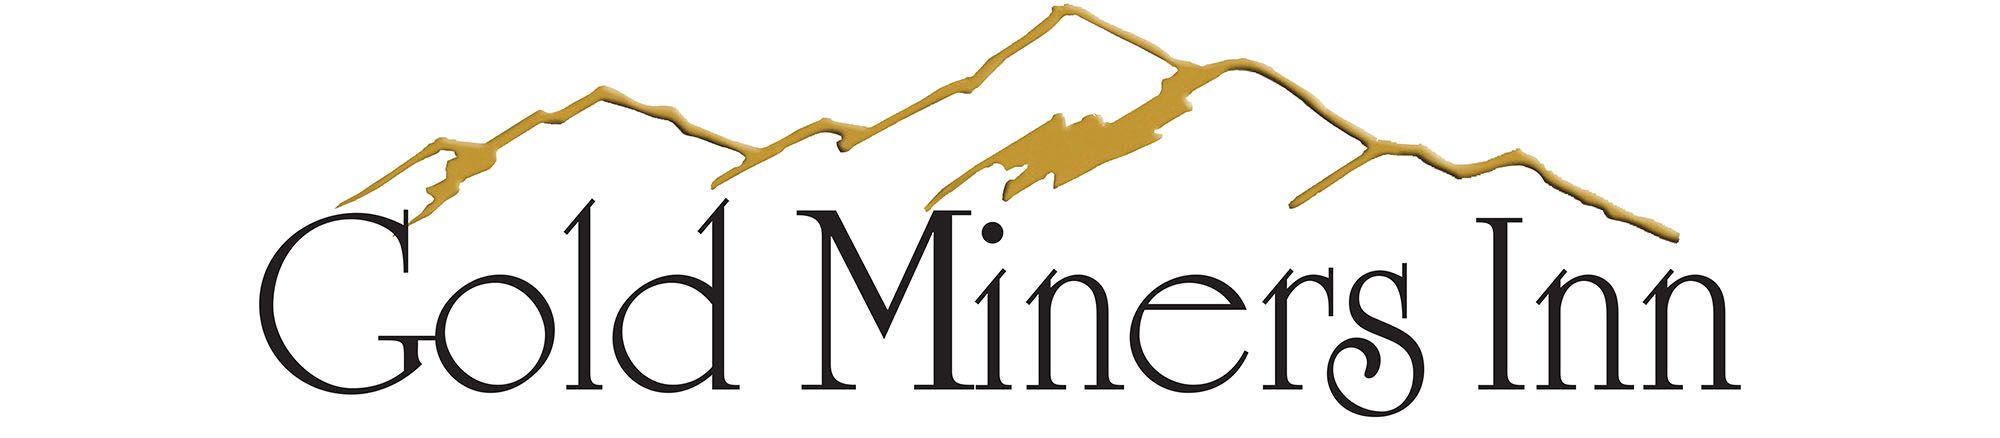 Gold Mining Logo - Grass Valley Hotels | Hotels in Grass Valley CA – Gold Miners Inn